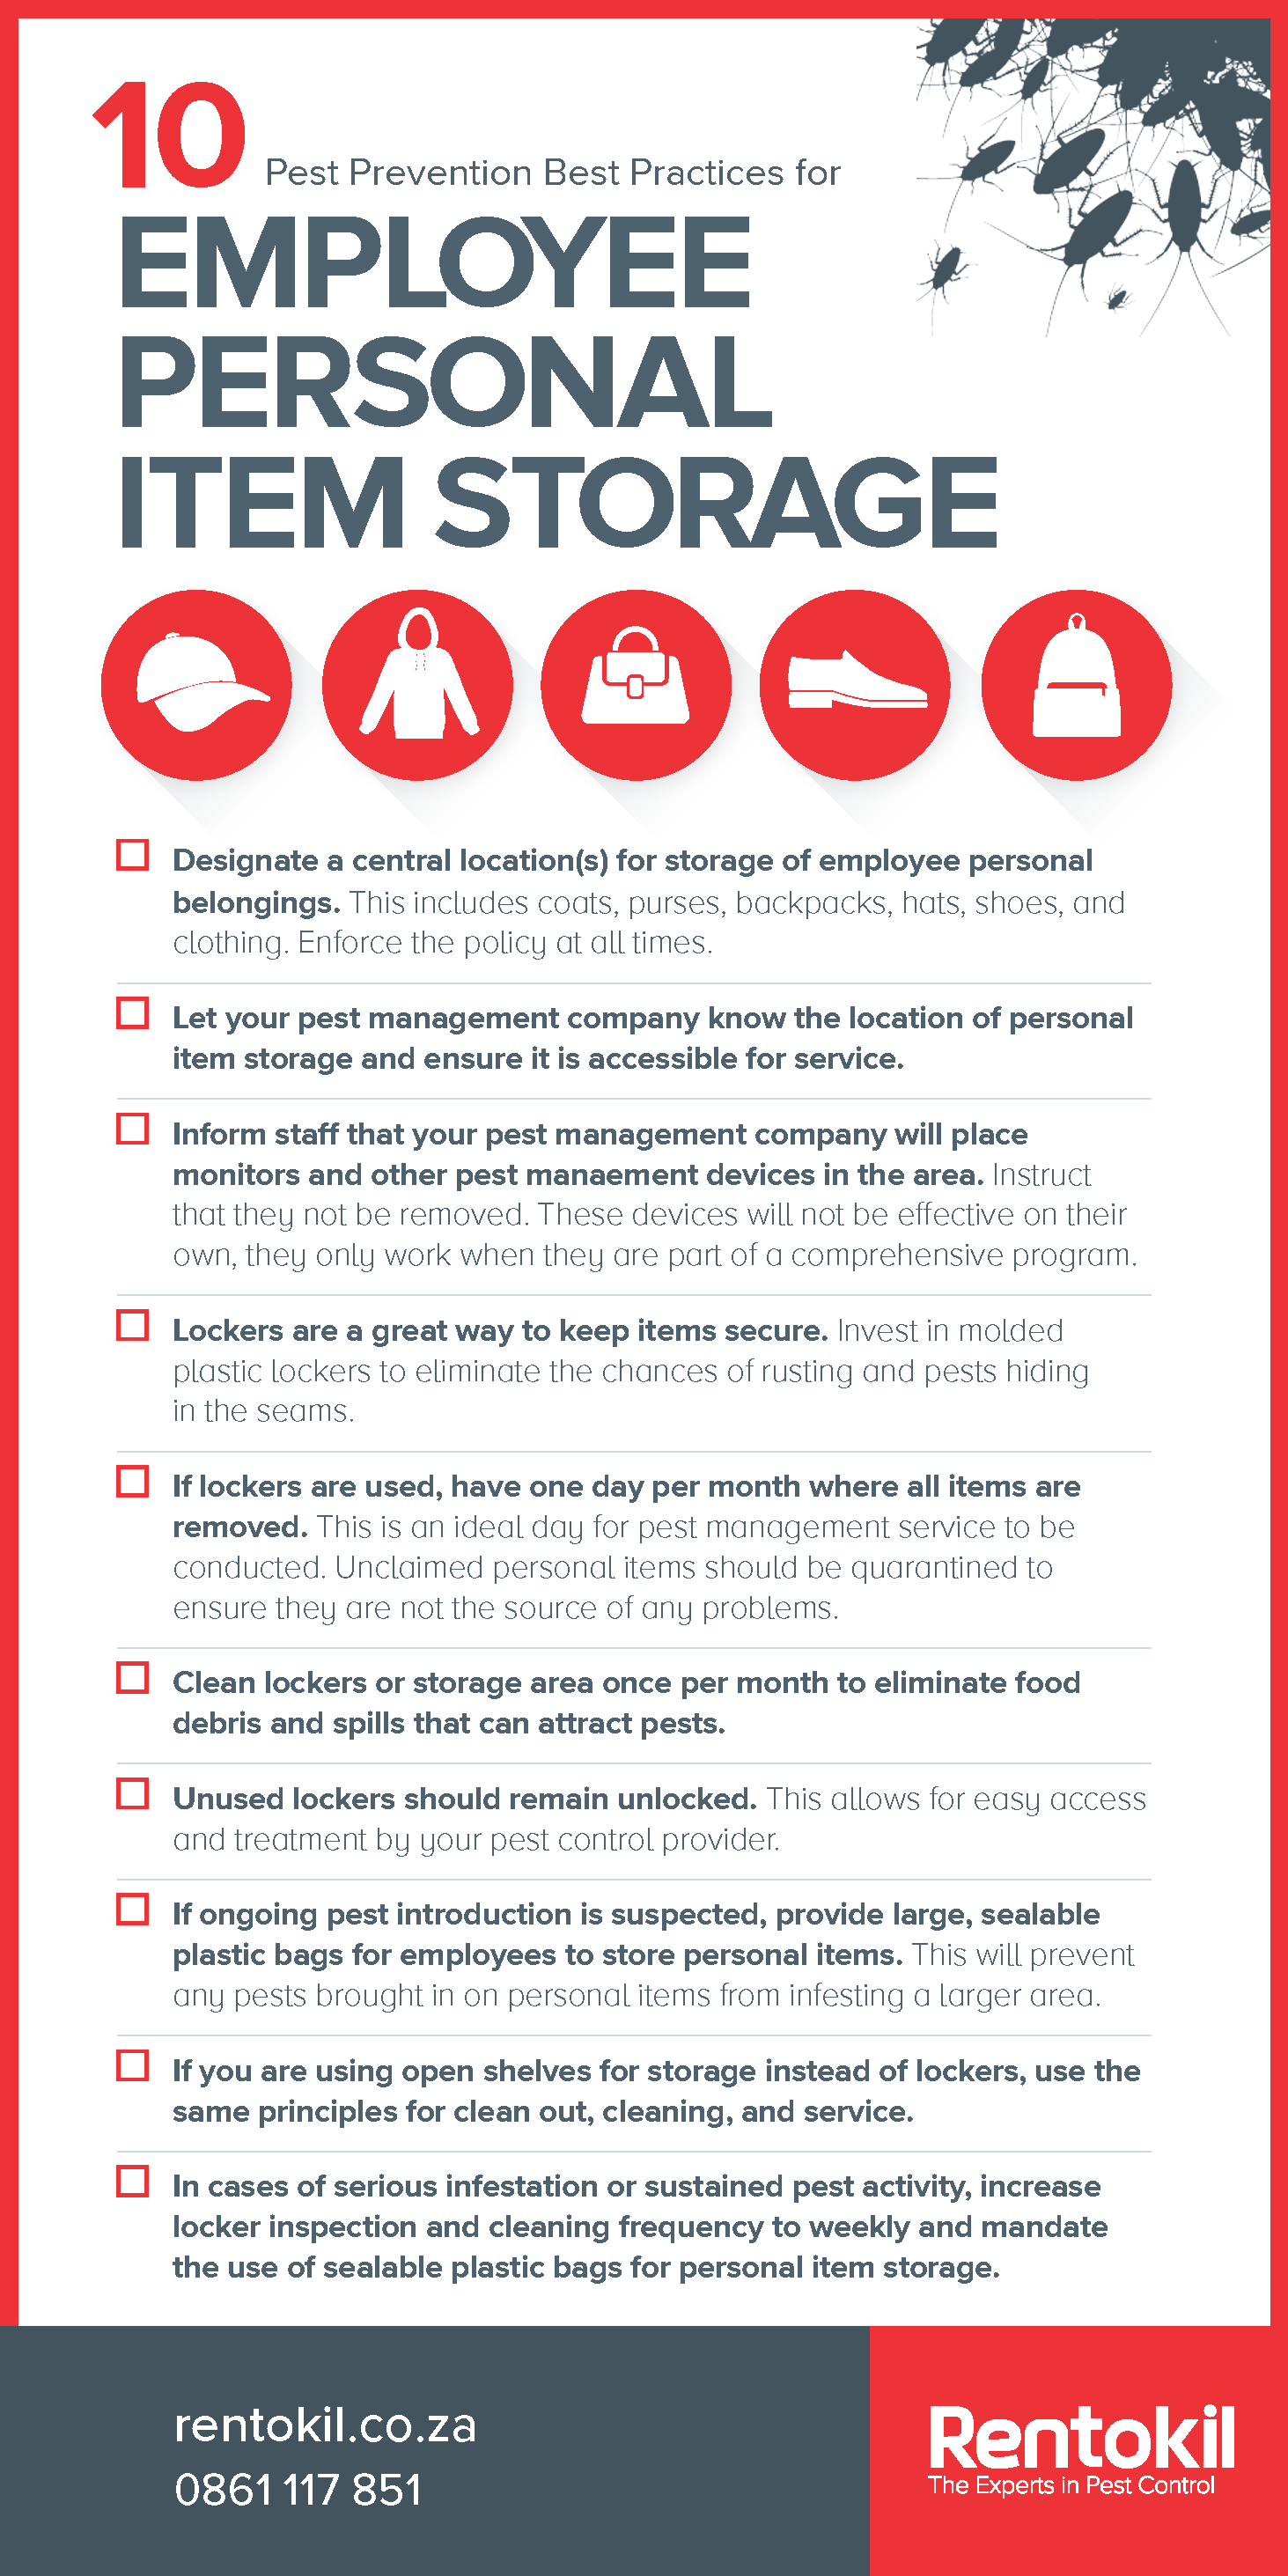 Pest Prevention Checklist Poster - 10 Best Practices for Employee Personal Item Storage